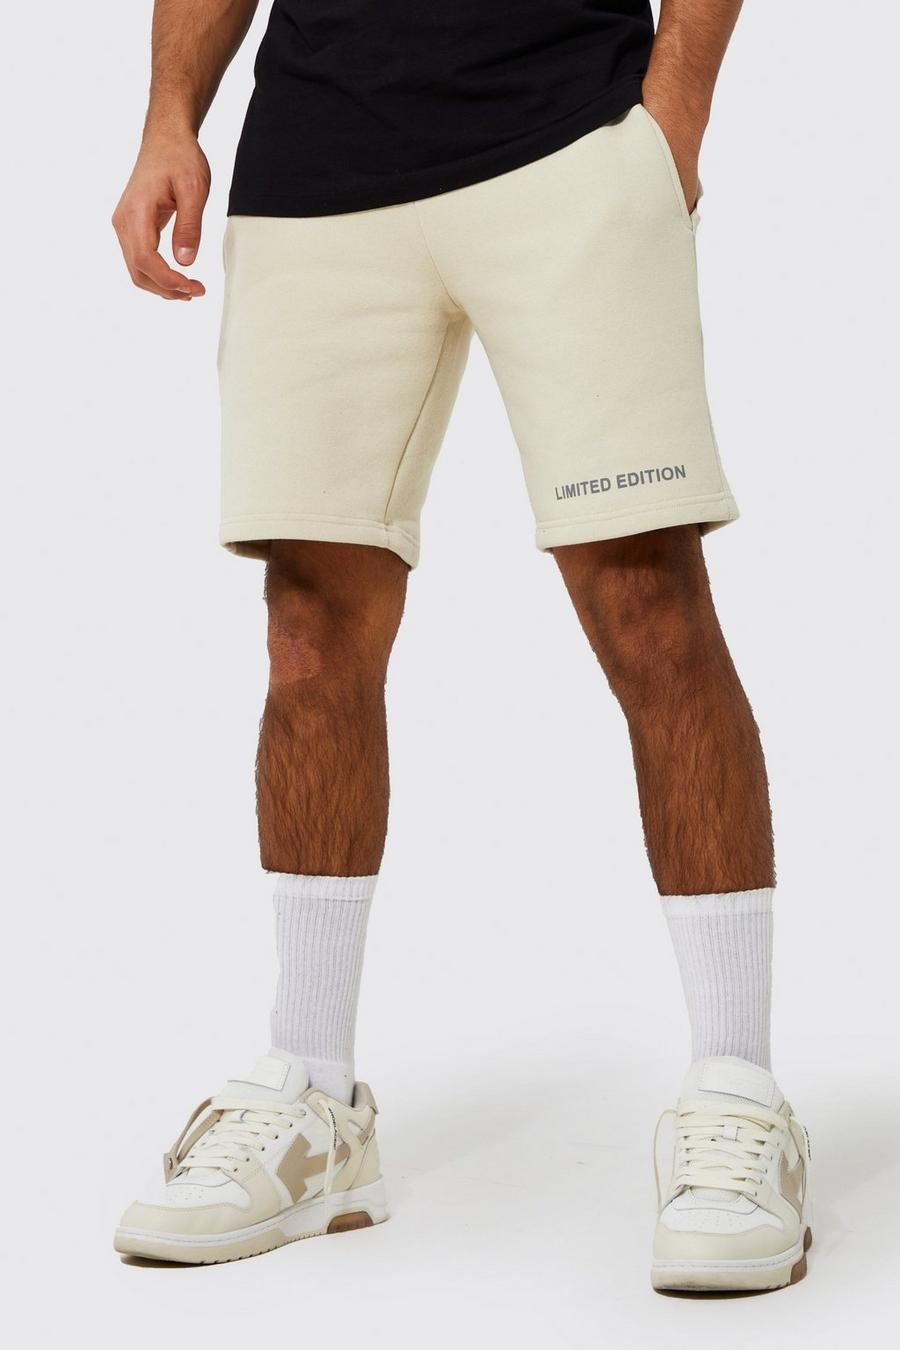 Pantaloncini Limited Edition Slim Fit in jersey, Stone beige